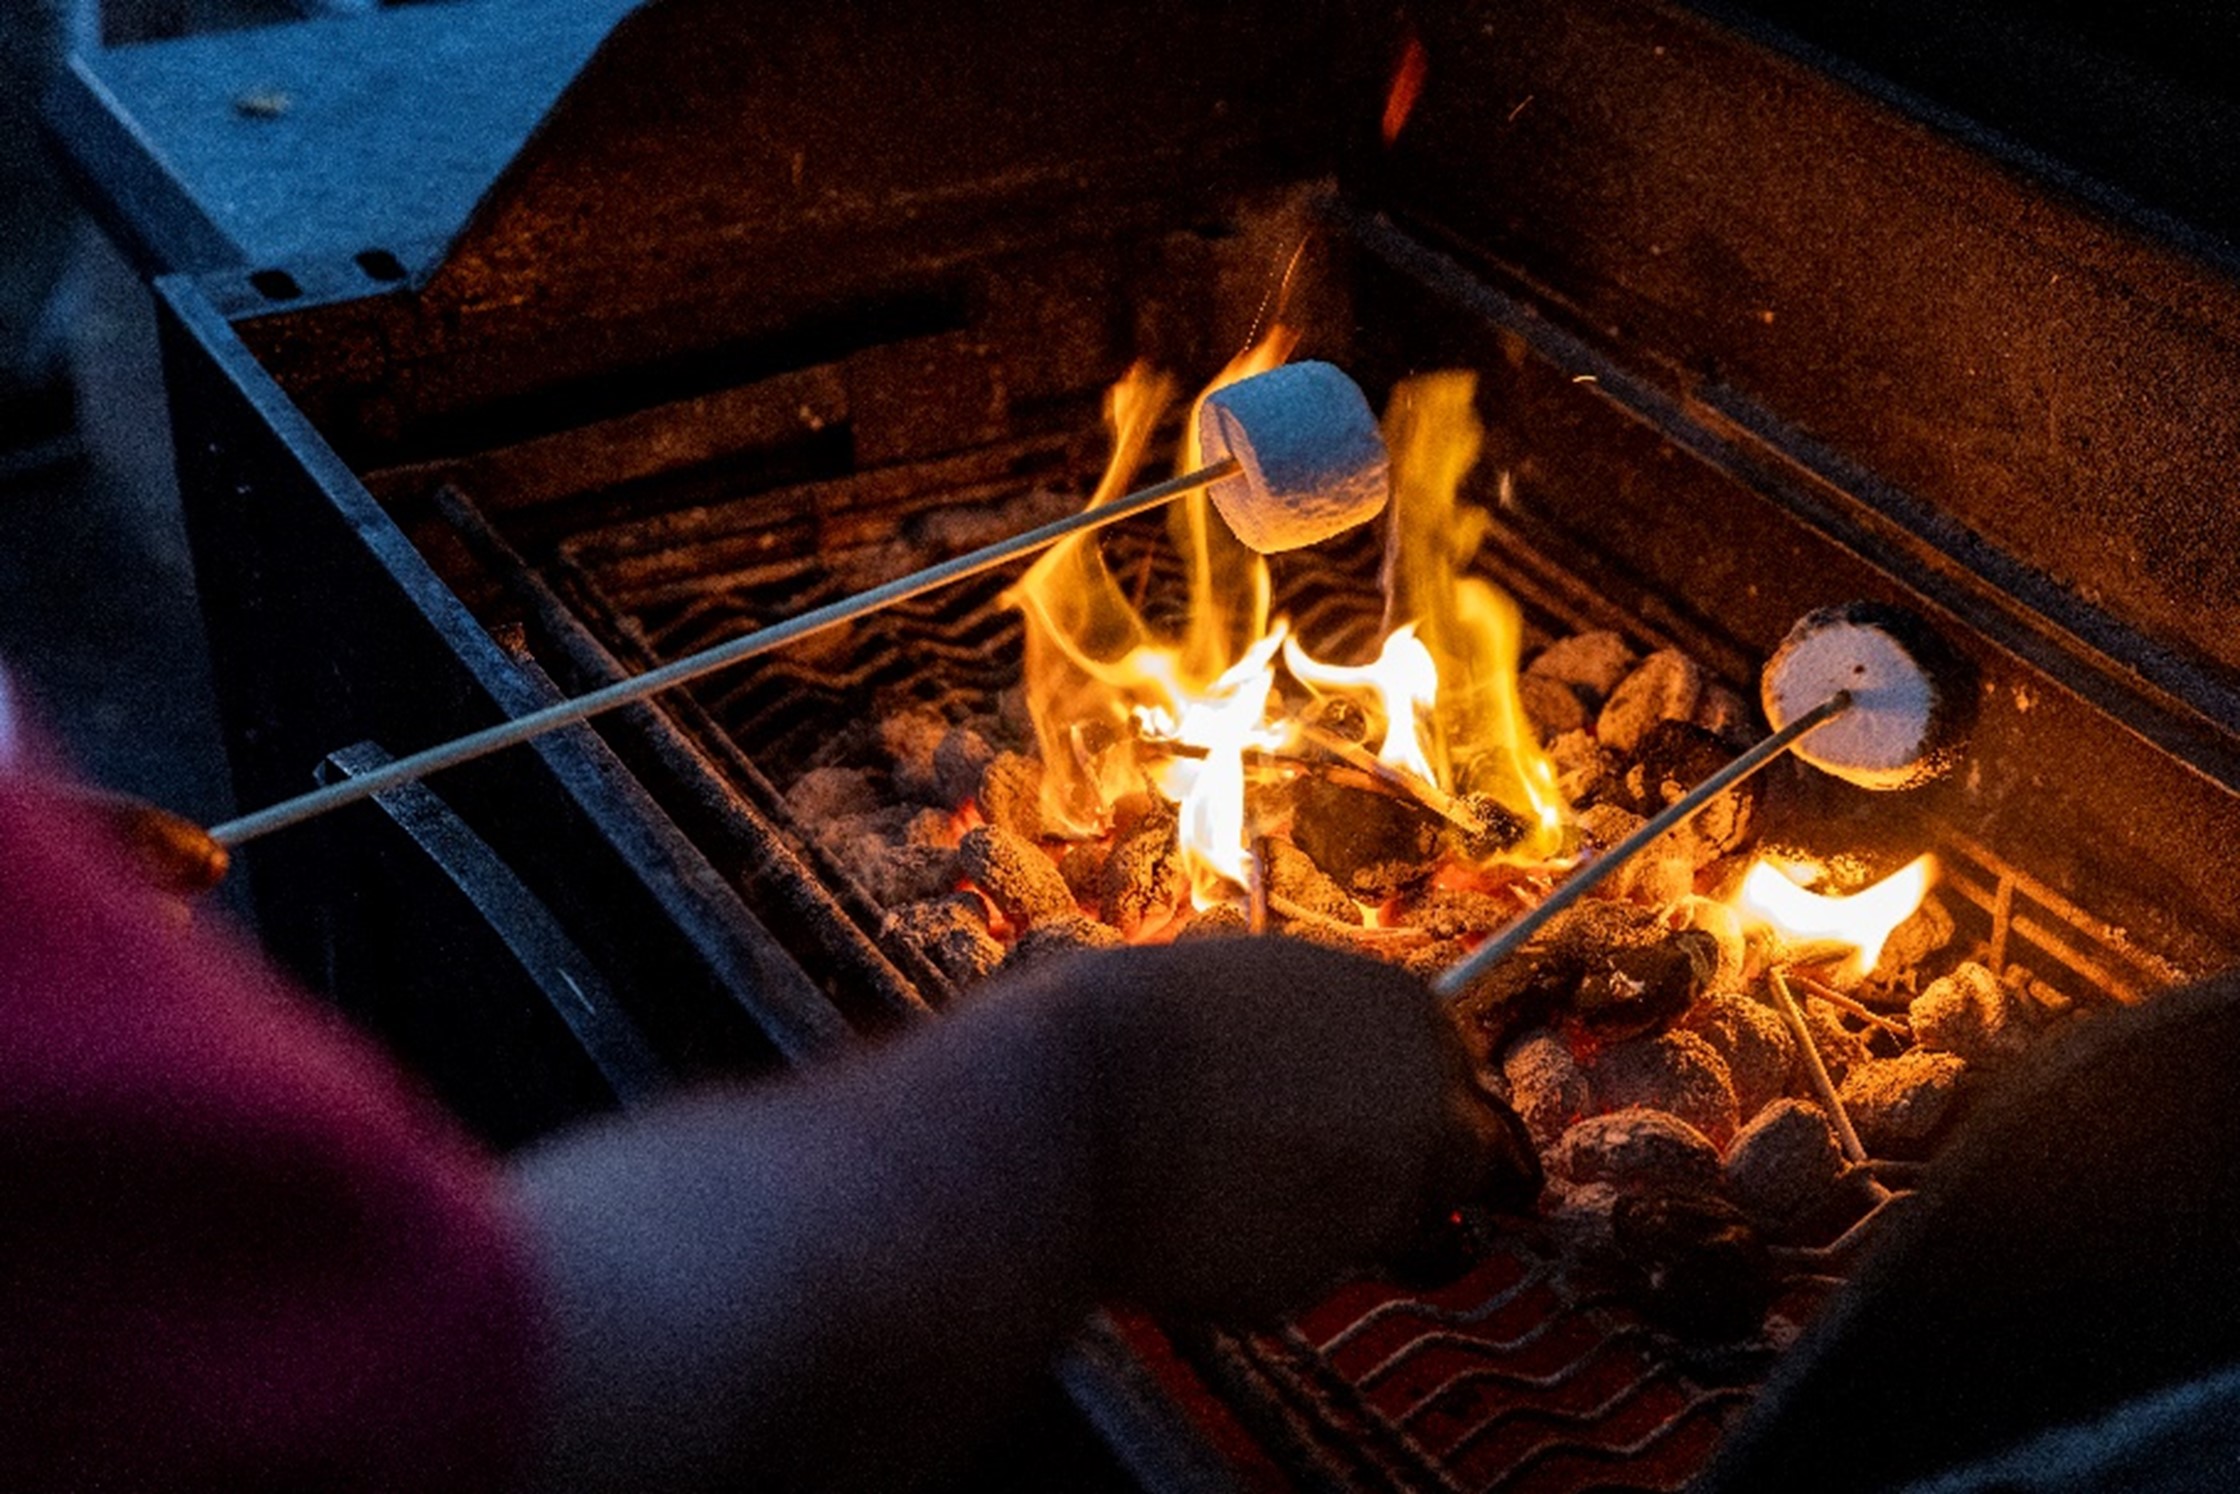 Picture to two marshmallows being toasted over a grill